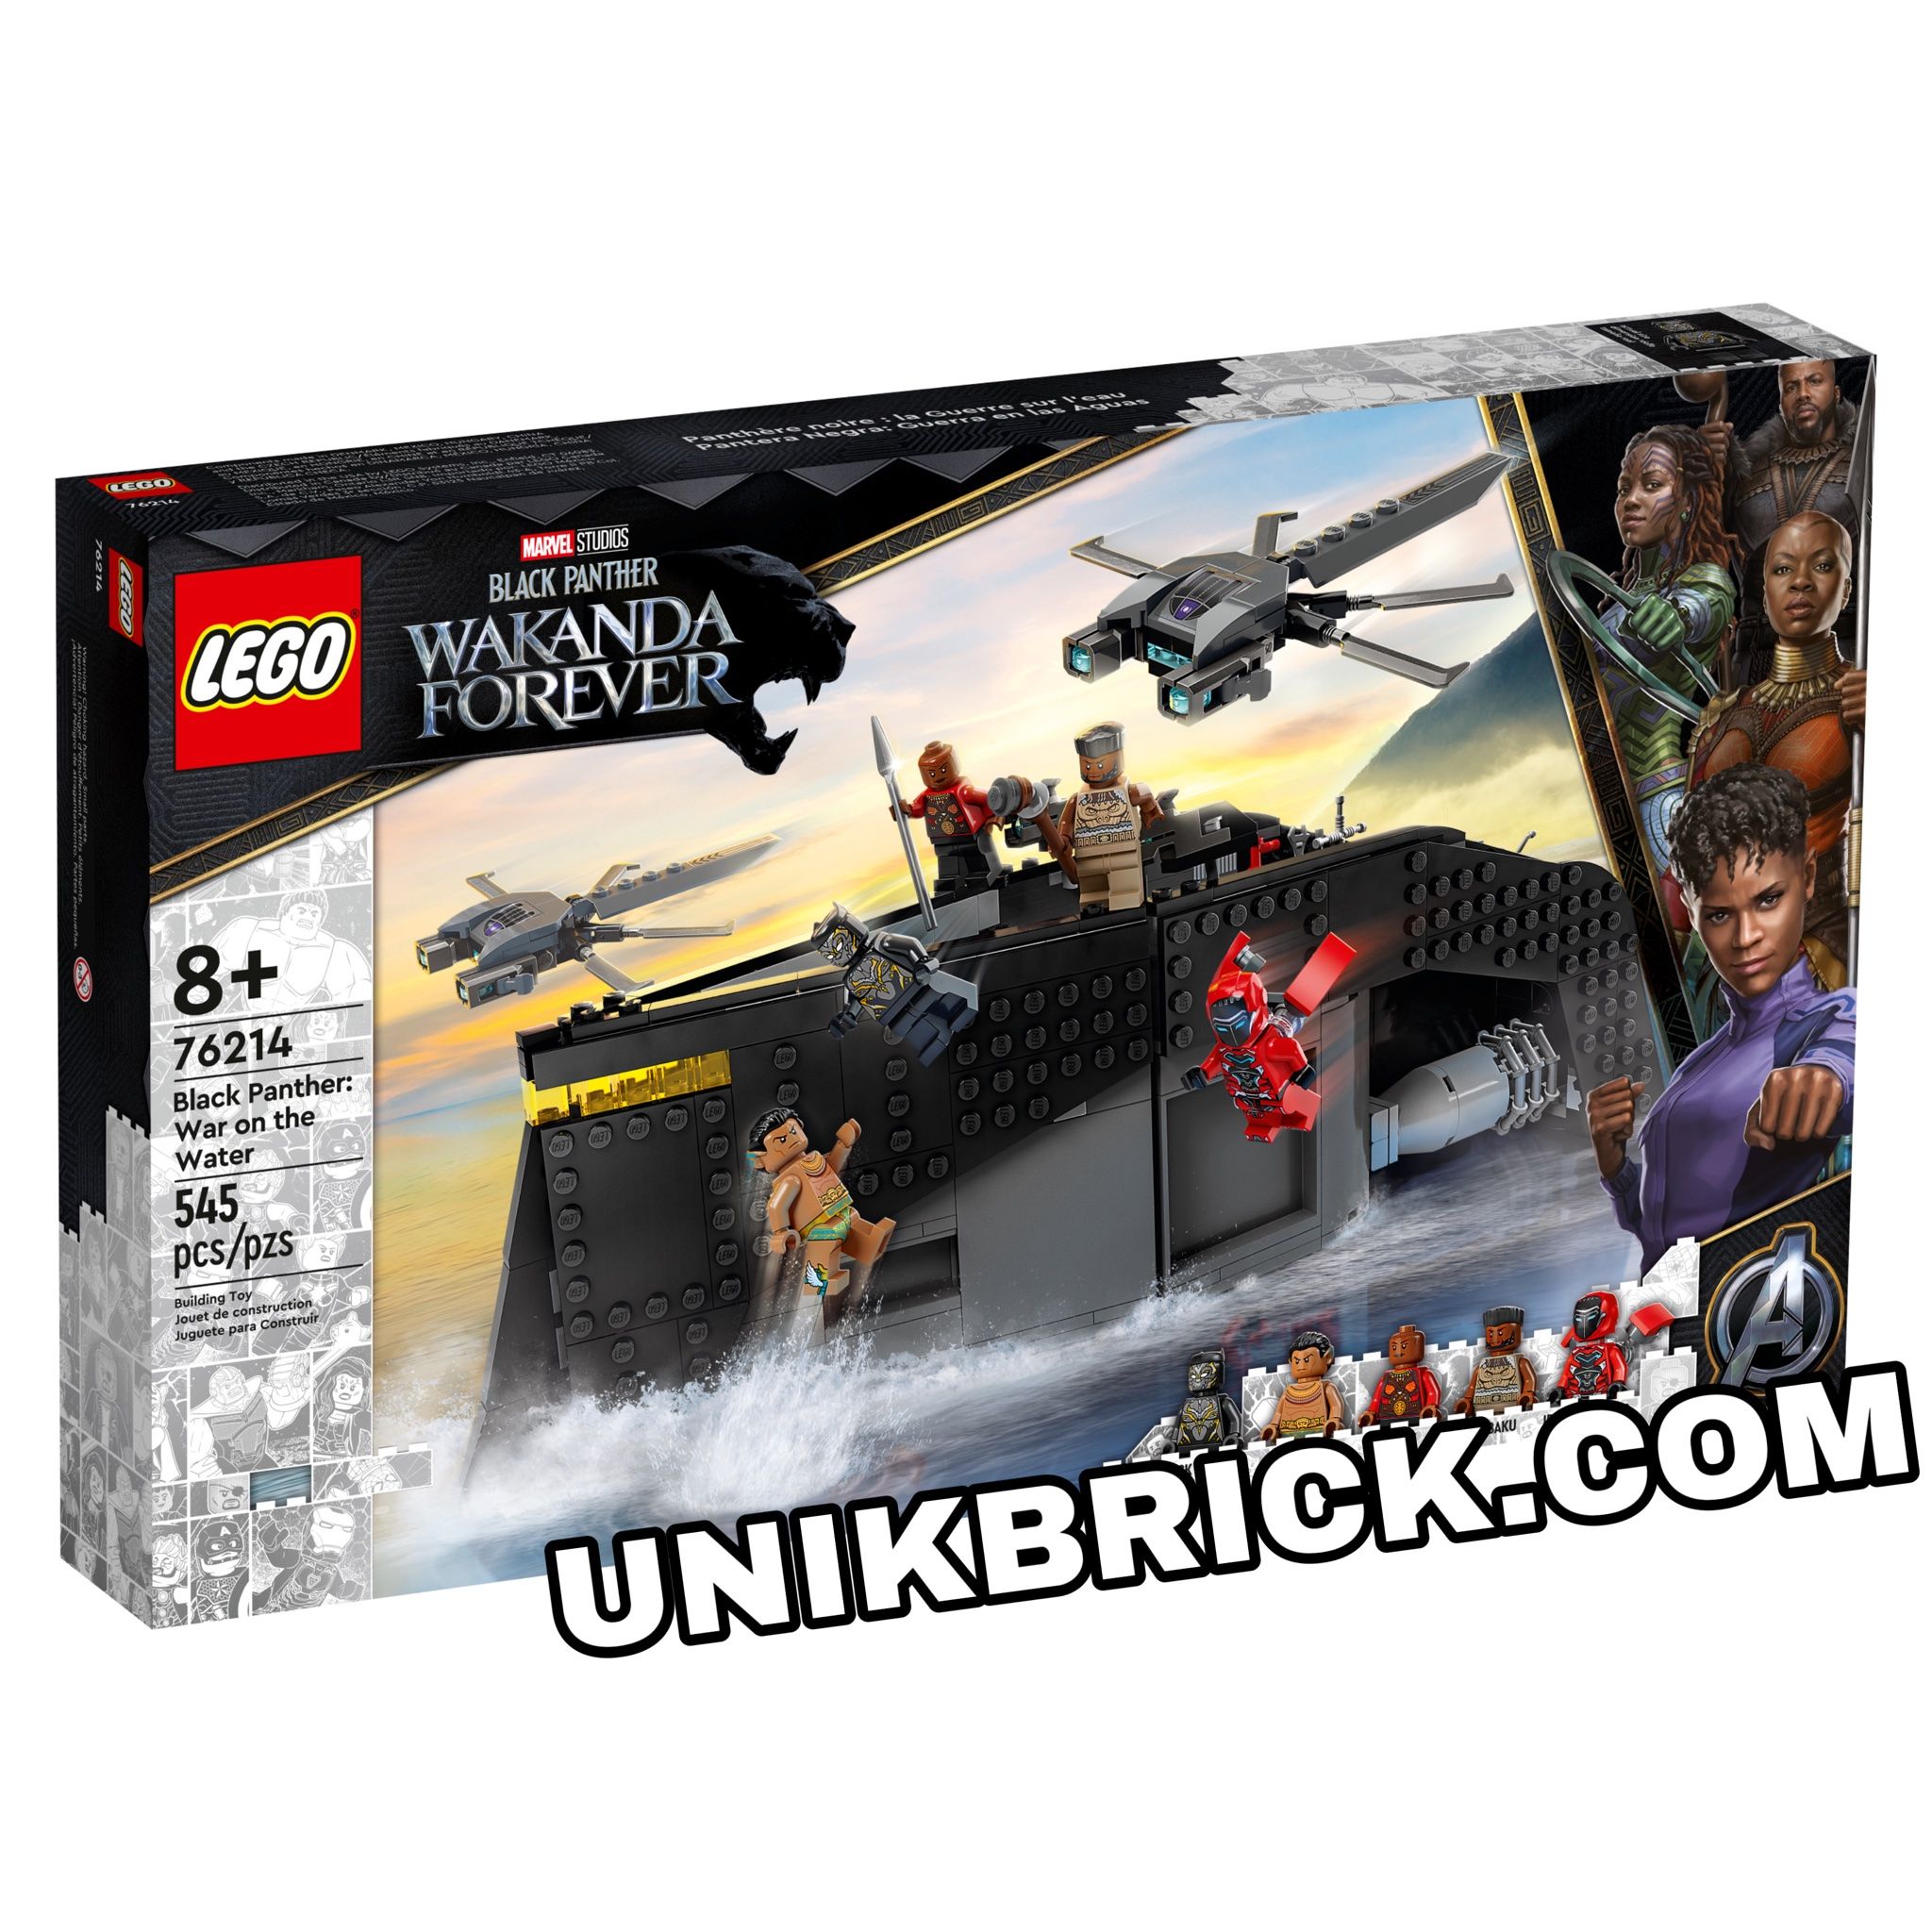 [CÓ HÀNG] LEGO Marvel 76214 Black Panther: War on the Water